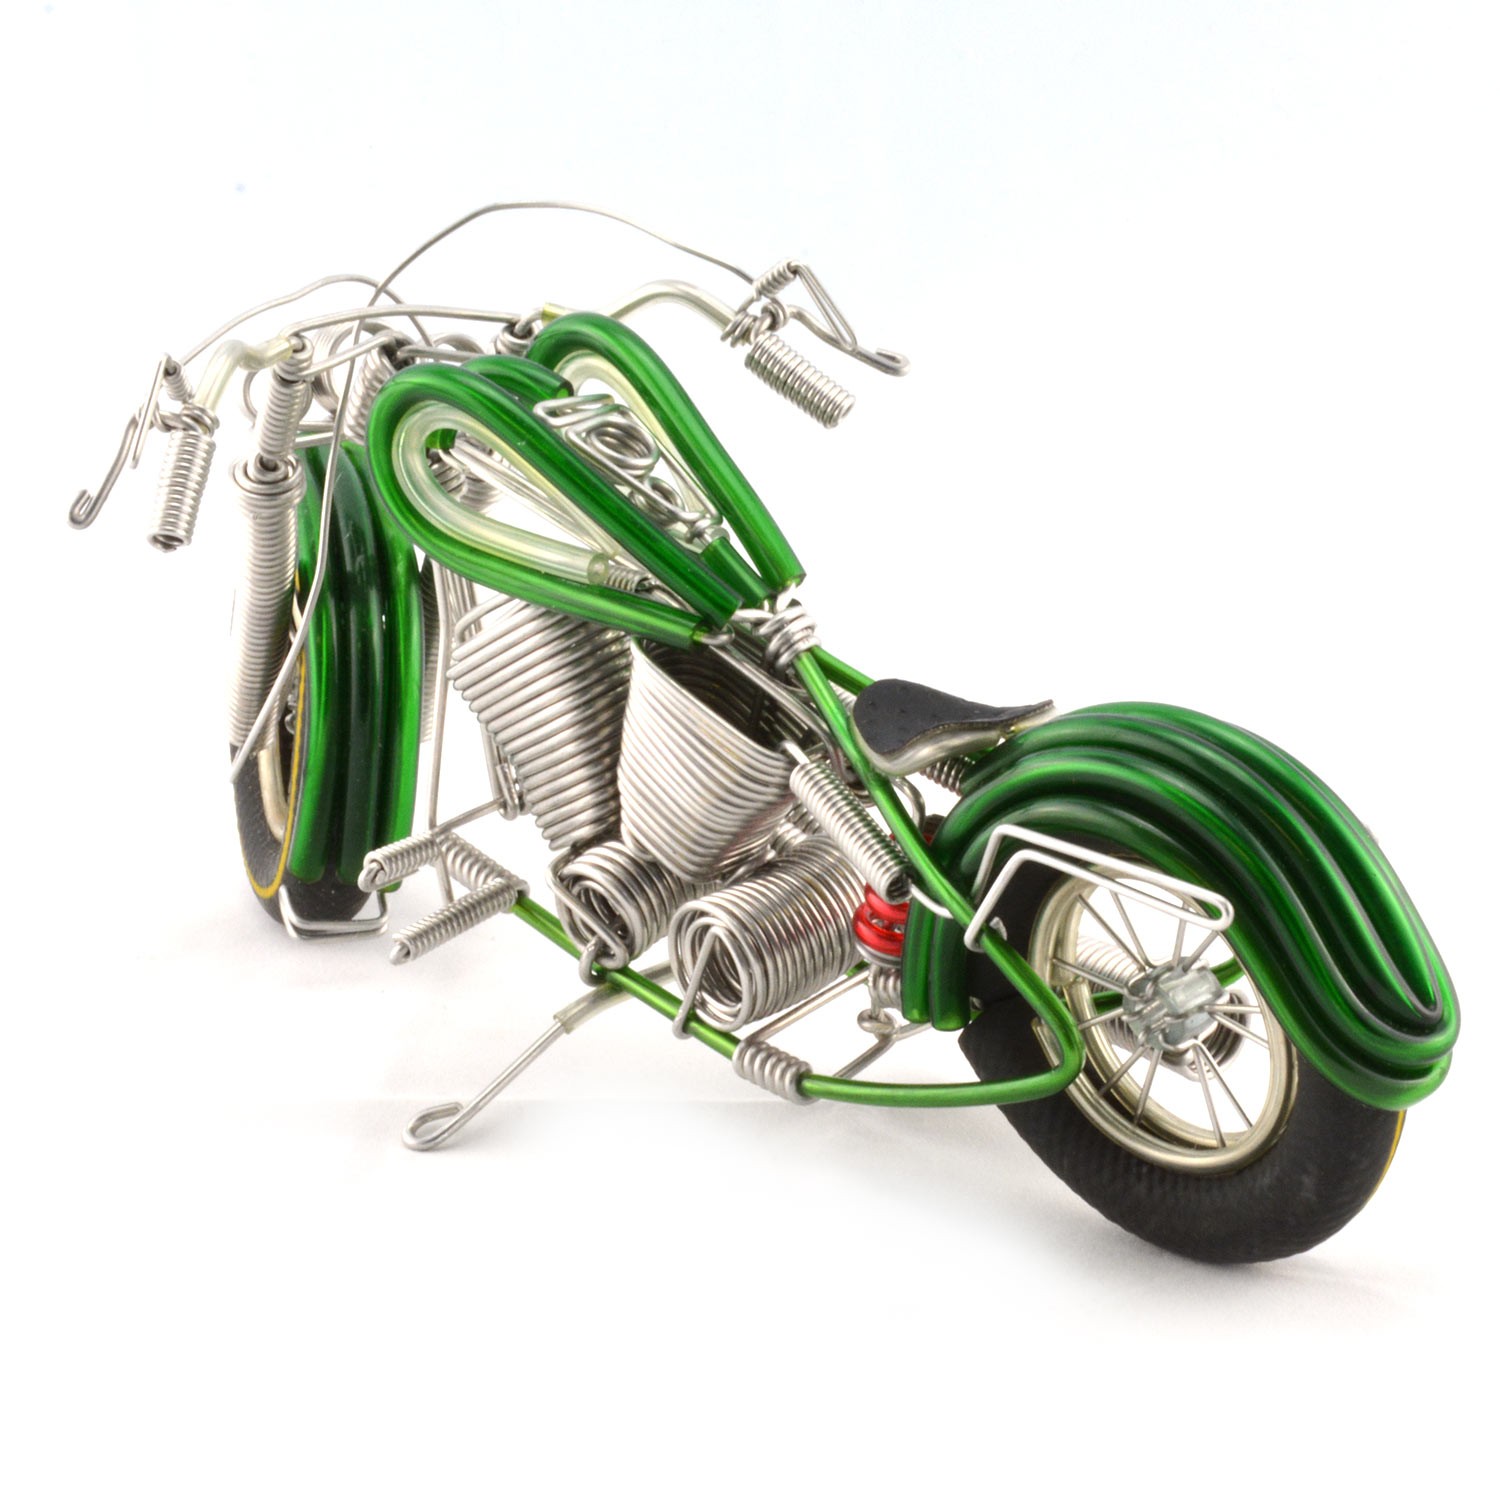 4 inch. Small Harley style bike Sculpture Motorbike handmade from wire